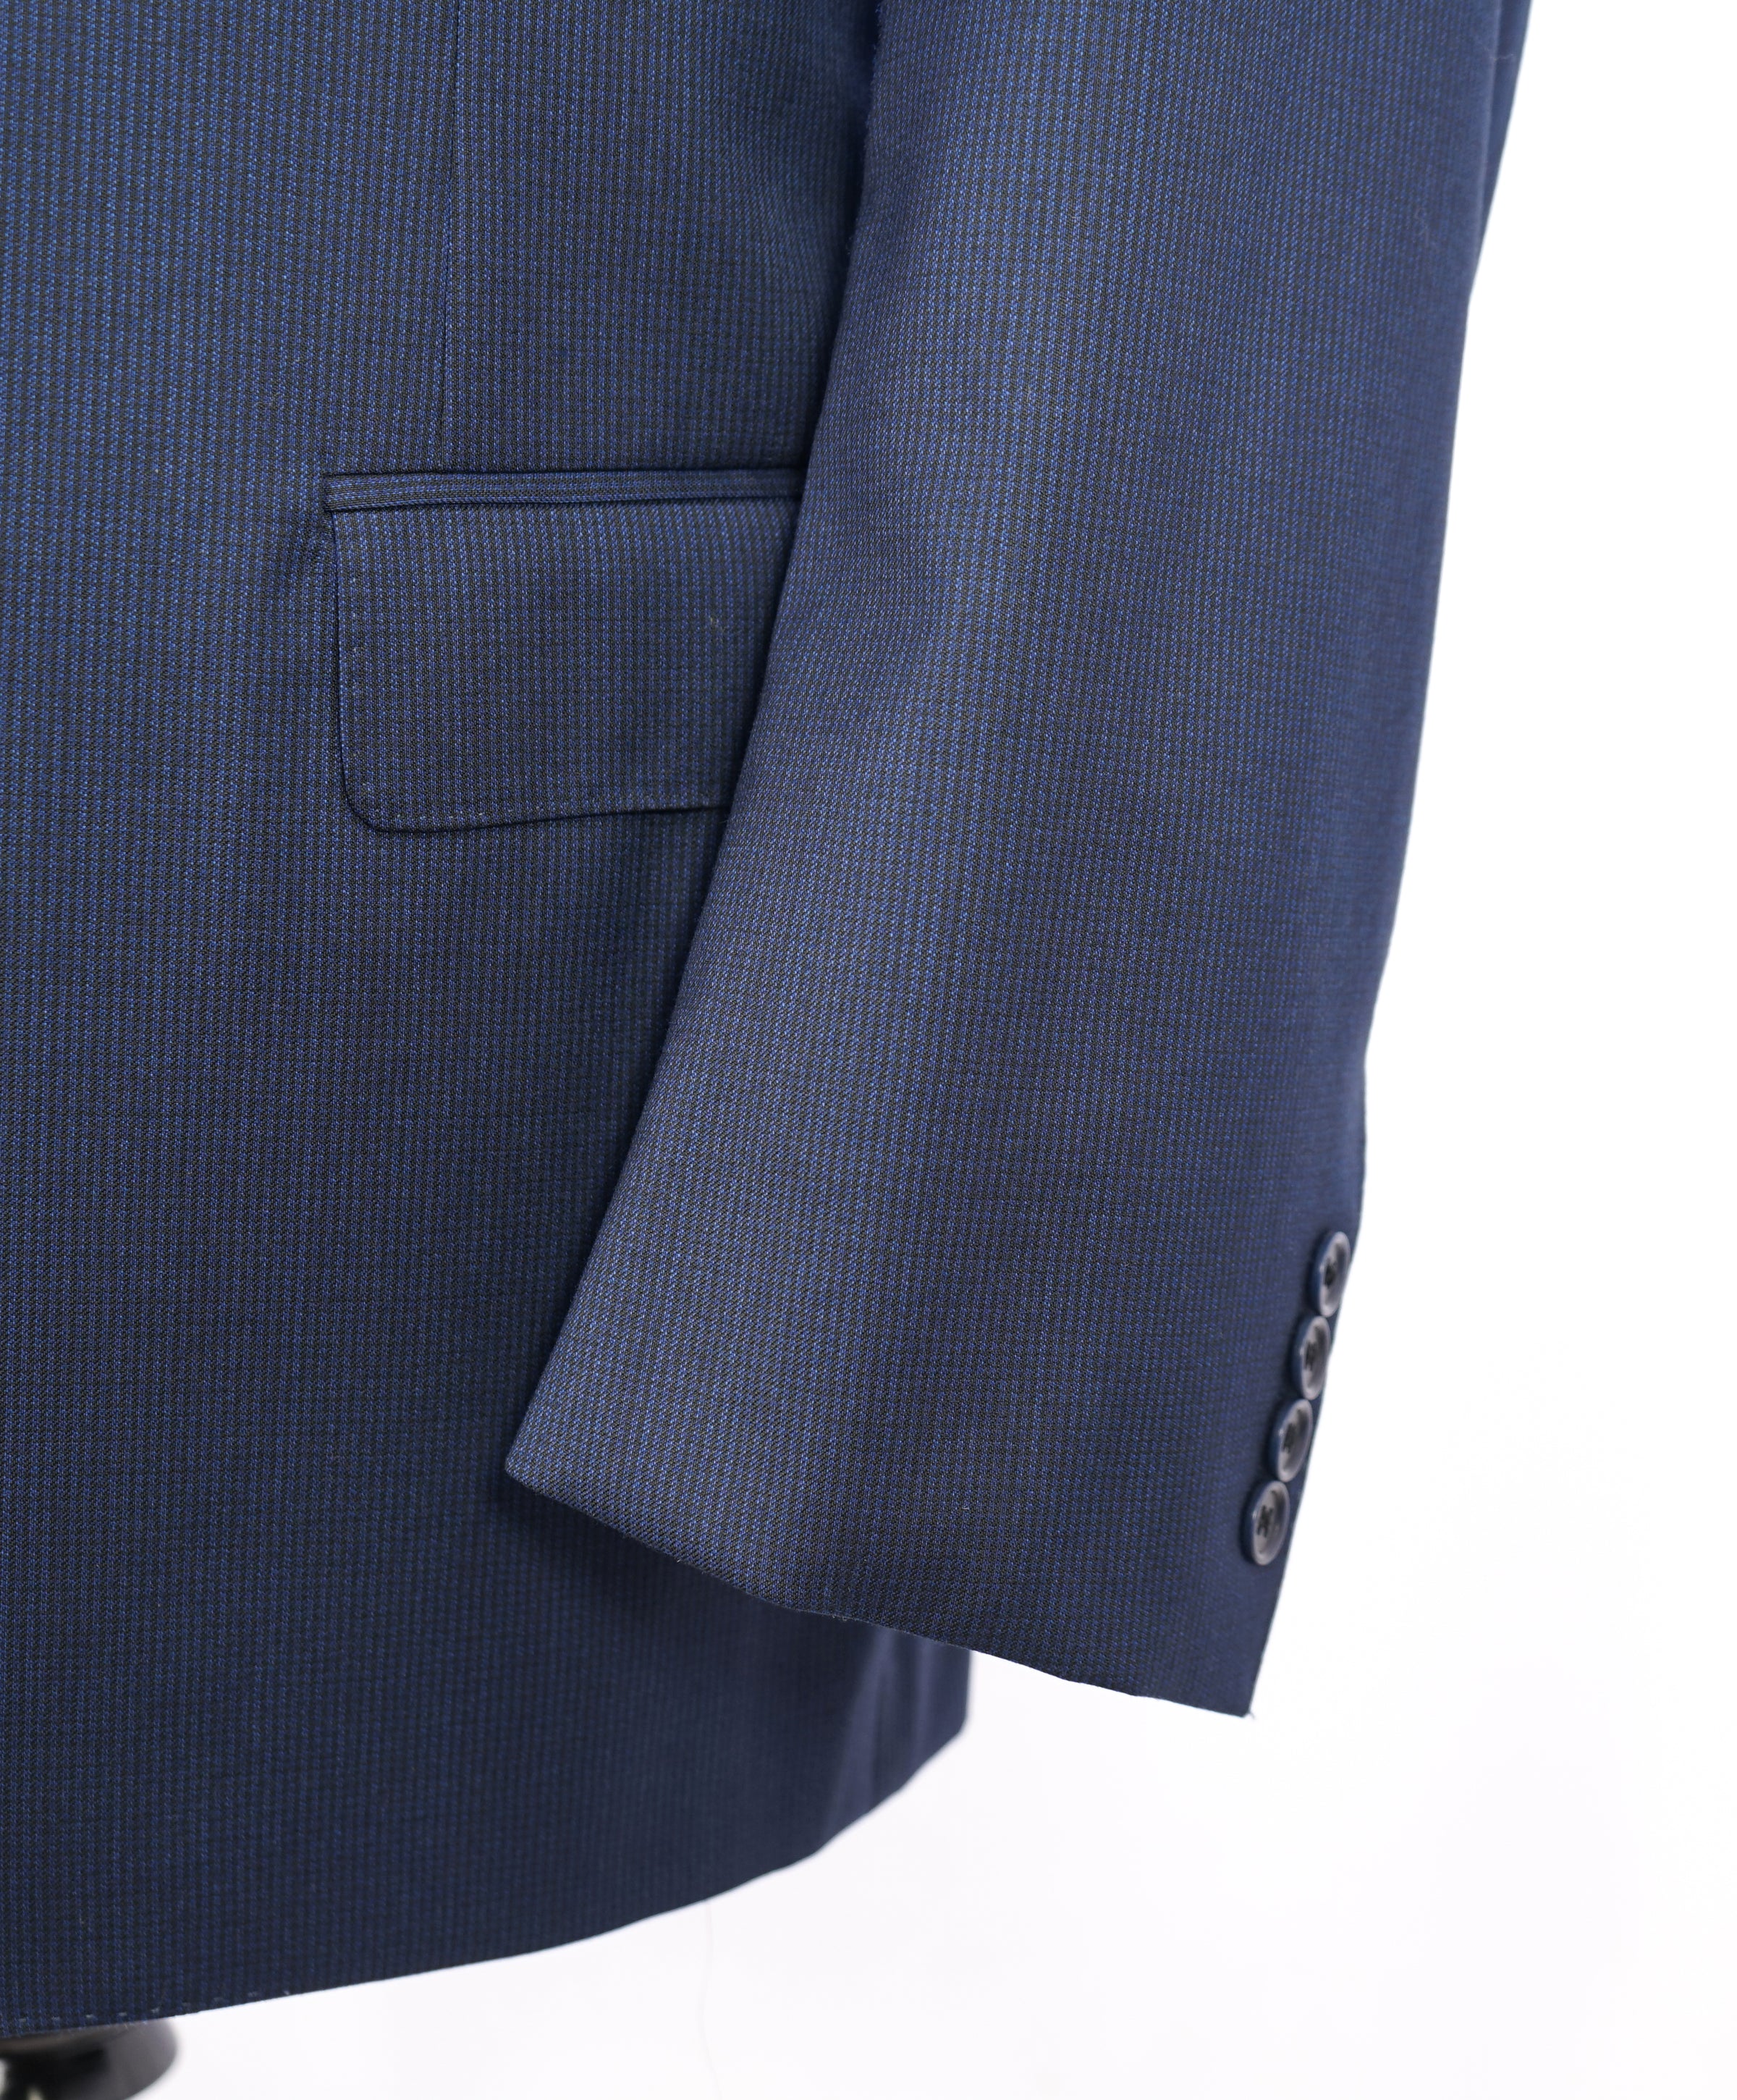 CANALI - Royal Blue Travel Check Rope Textured Blazer - 44R – Luxe Hanger